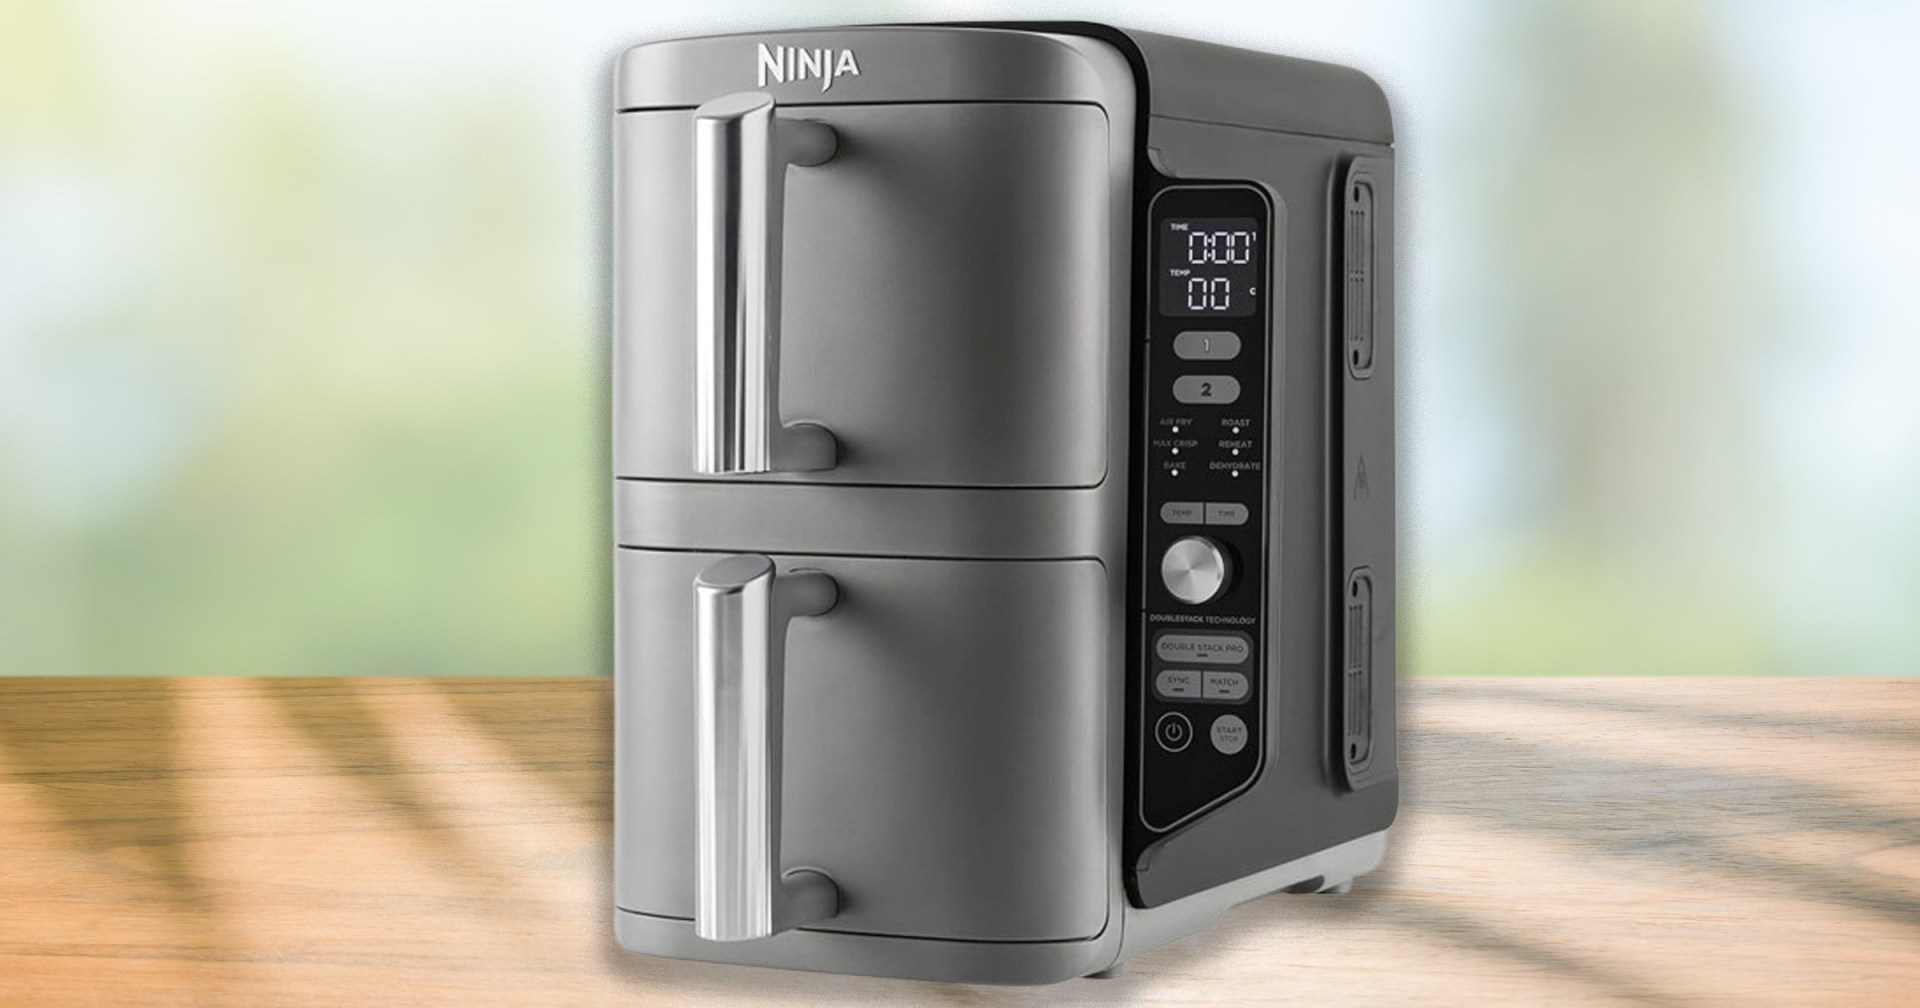 shoppers call this ninja air fryer ‘the best yet’ and is 30% slimmer than best-seller